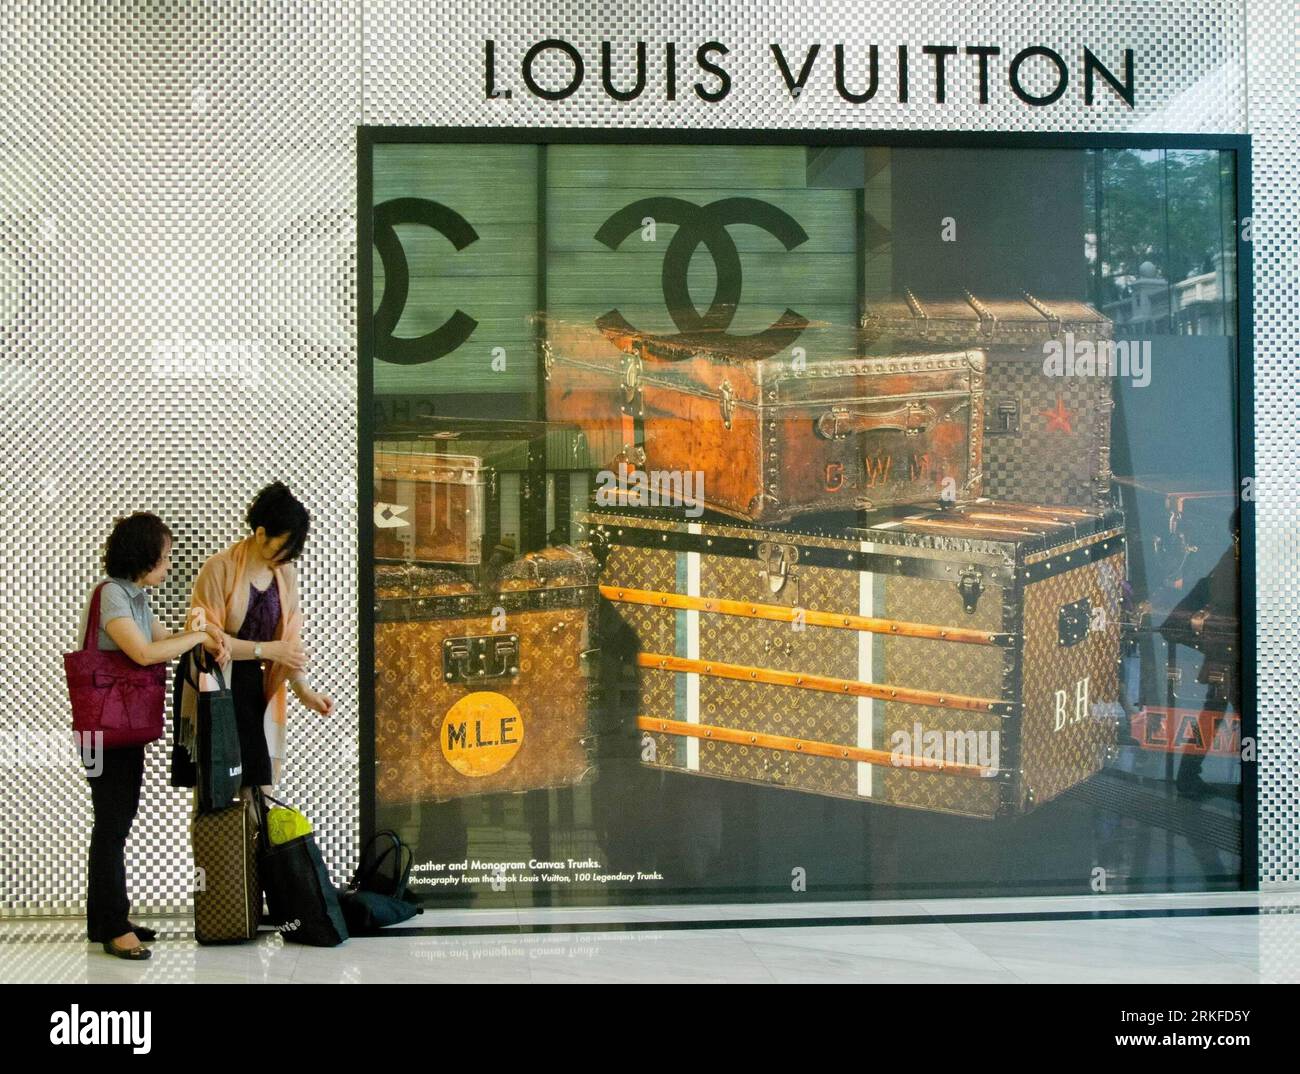 Bravern Mall's Louis Vuitton Store: A Showcase of Design and